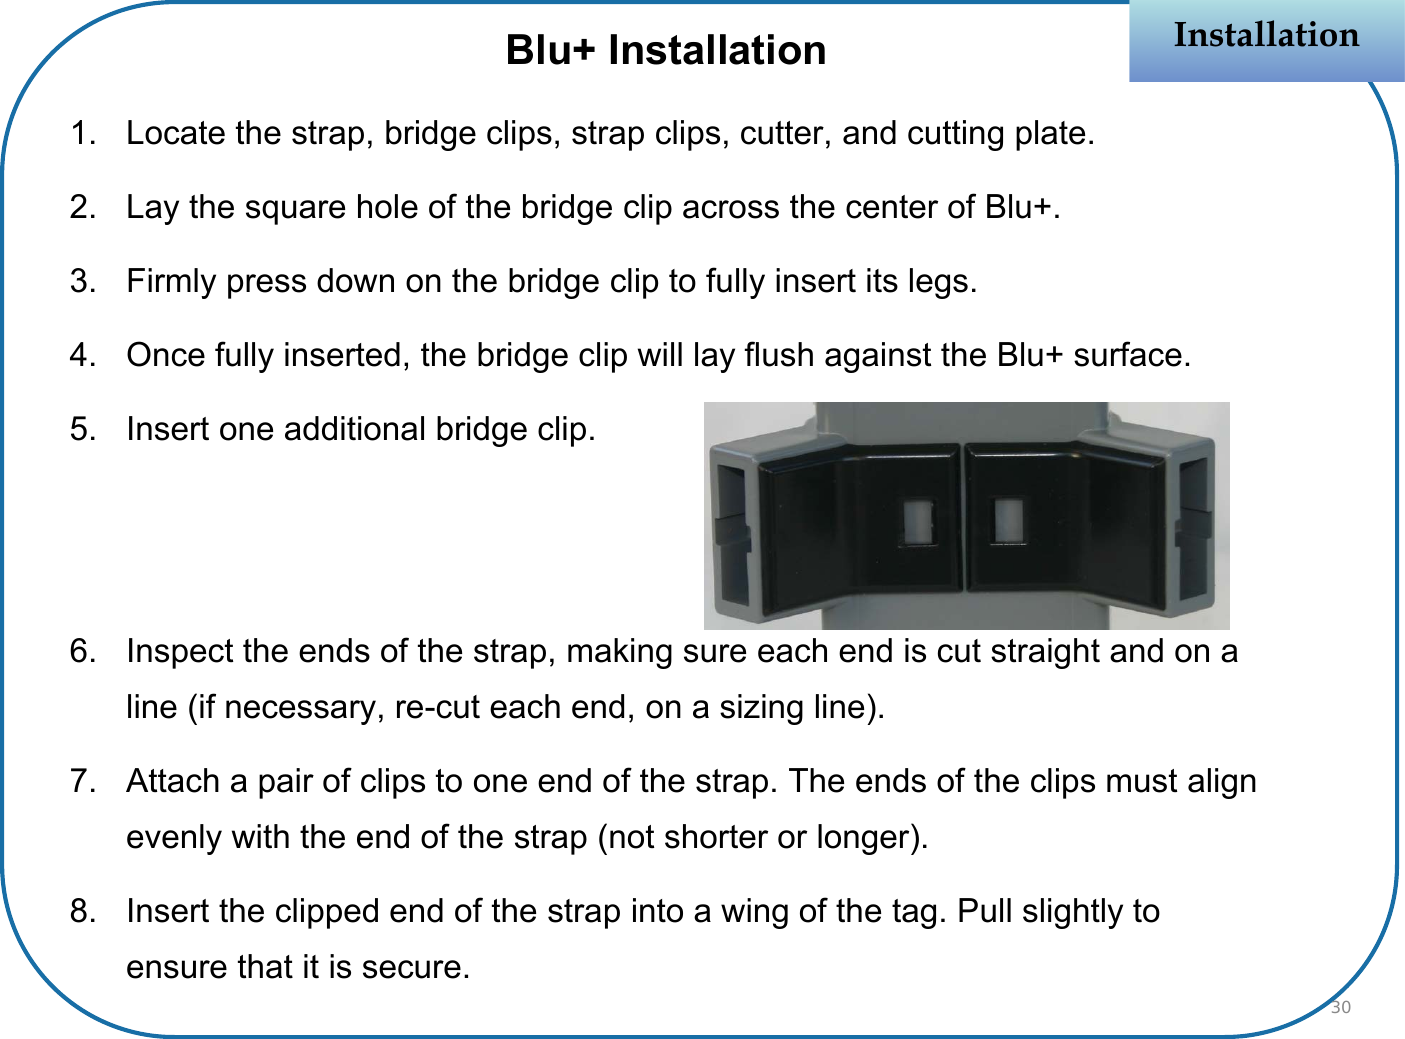 Blu+ Installation1. Locate the strap, bridge clips, strap clips, cutter, and cutting plate.2. Lay the square hole of the bridge clip across the center of Blu+.3. Firmly press down on the bridge clip to fully insert its legs.4. Once fully inserted, the bridge clip will lay flush against the Blu+ surface.5. Insert one additional bridge clip.6. Inspect the ends of the strap, making sure each end is cut straight and on a line (if necessary, re-cut each end, on a sizing line).7. Attach a pair of clips to one end of the strap. The ends of the clips must align evenly with the end of the strap (not shorter or longer).8. Insert the clipped end of the strap into a wing of the tag. Pull slightly to ensure that it is secure. InstallationInstallation30